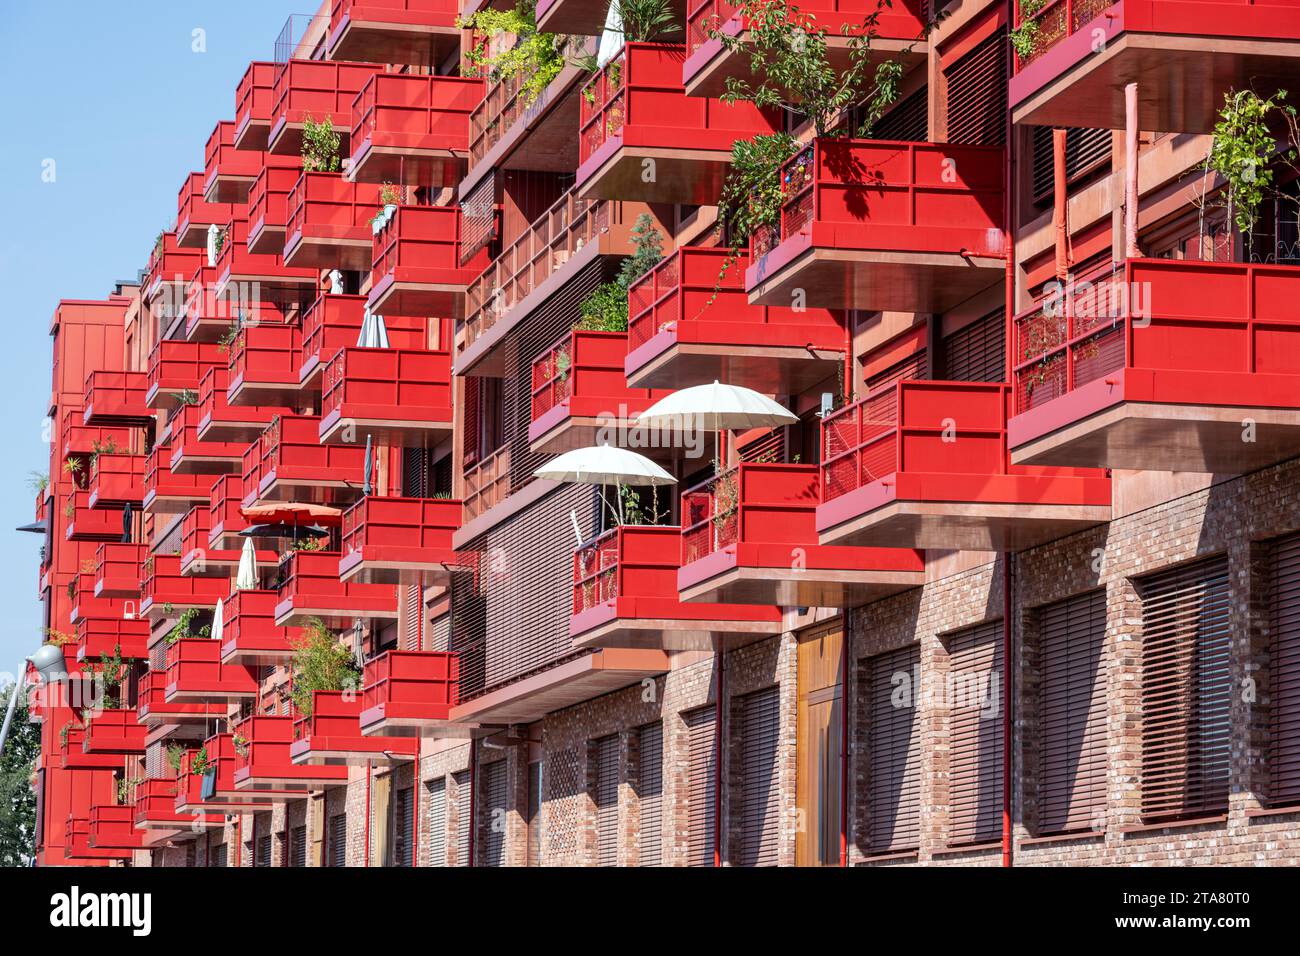 New red apartment building with balconies seen in Berlin, Germany Stock Photo